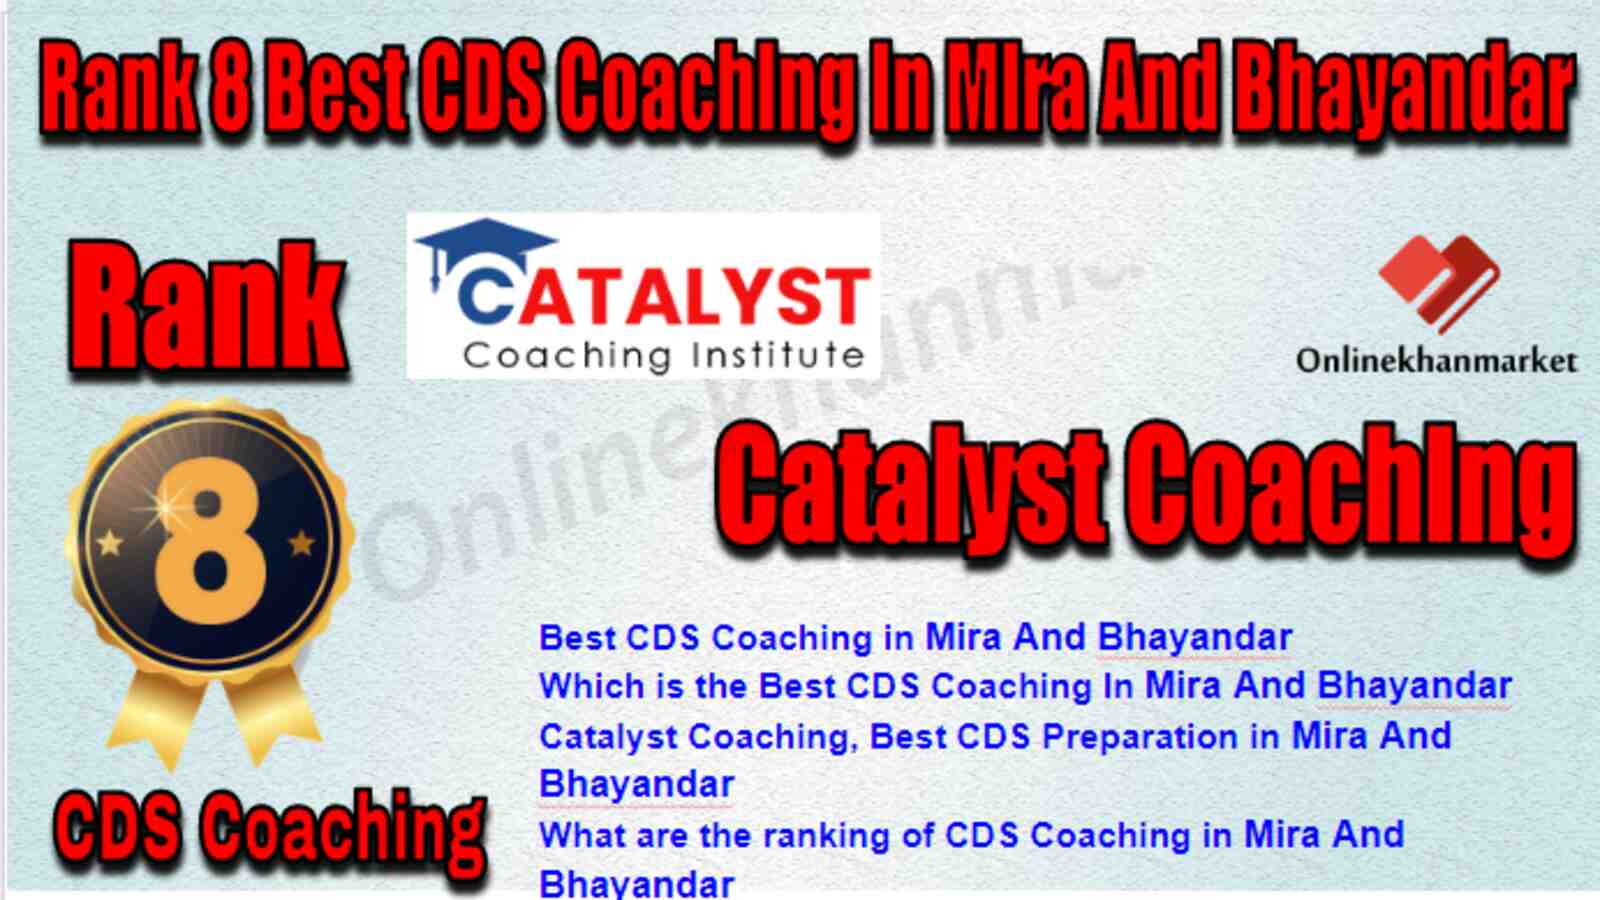 Rank 8 Best CDS Coaching in Mira and Bhayandar